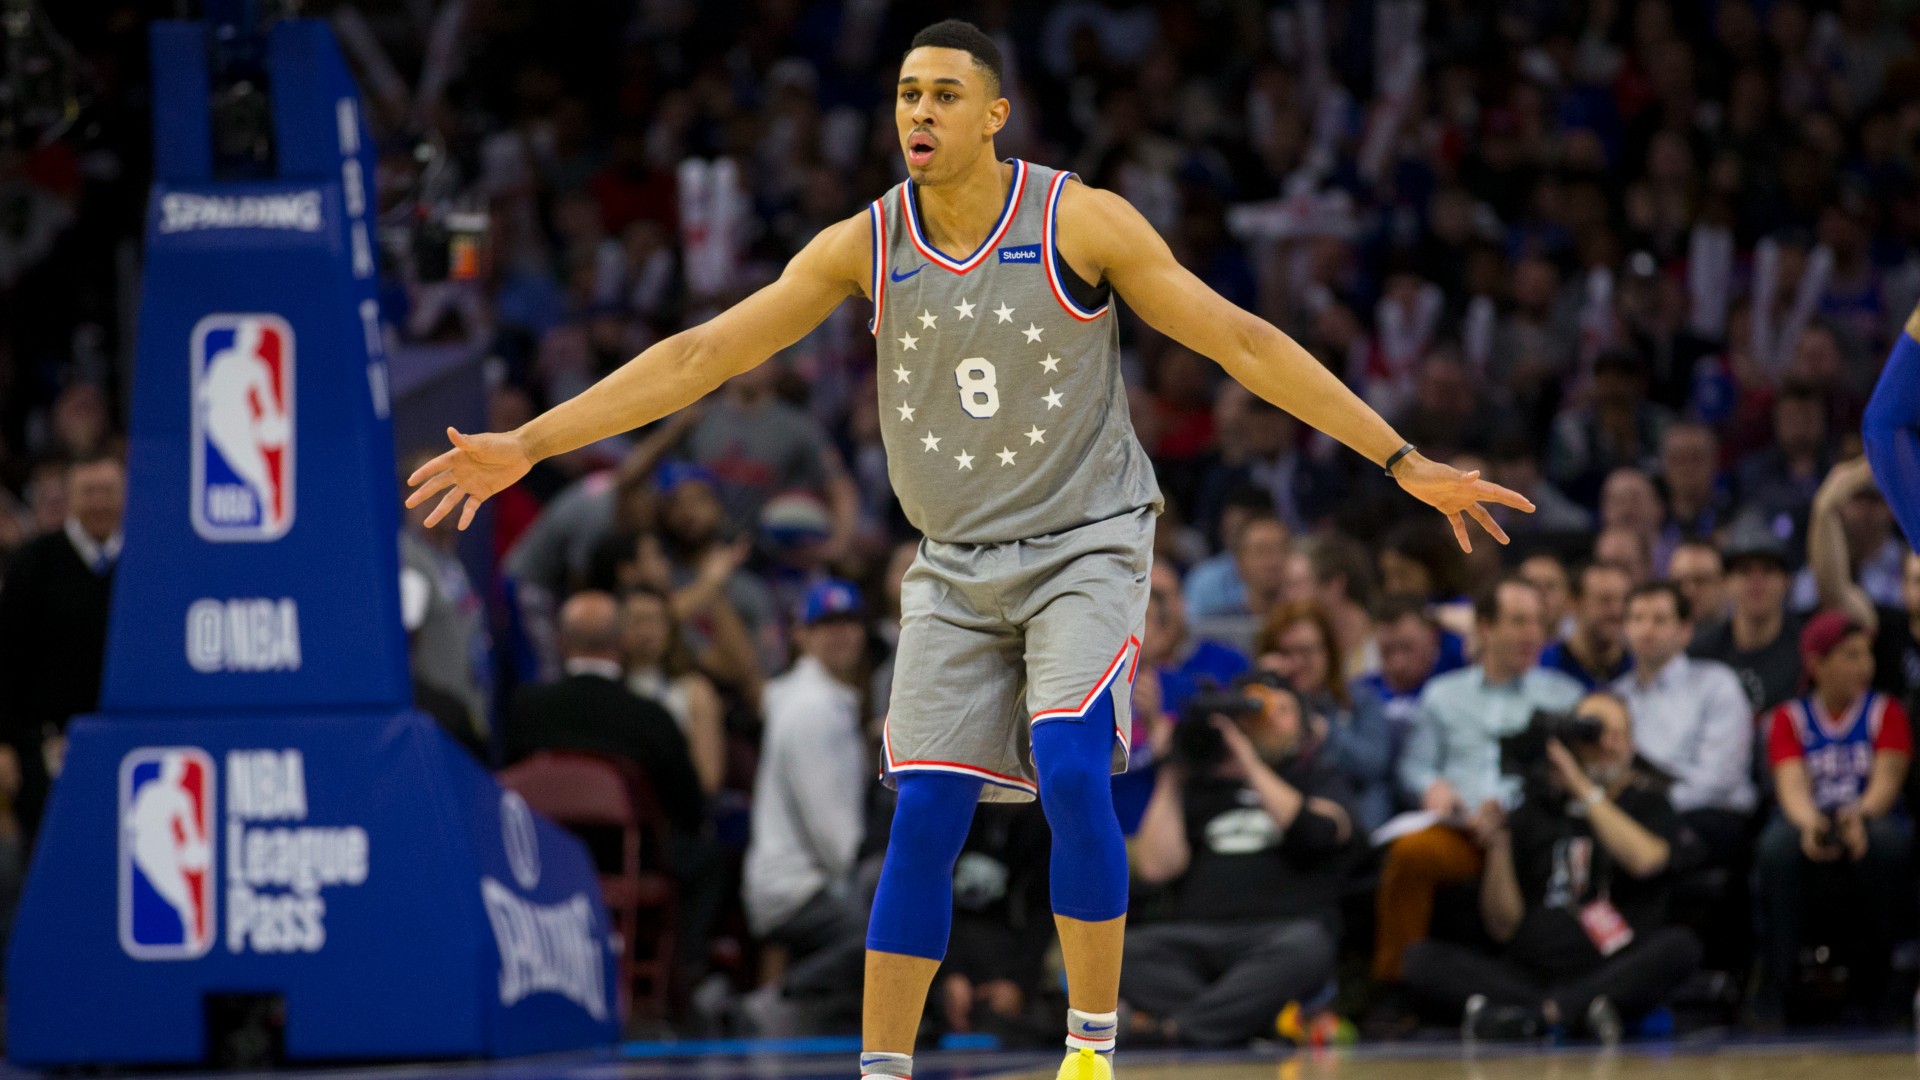 Zhaire Smith was a draft night trade acquisition by the 76ers that didn't work out